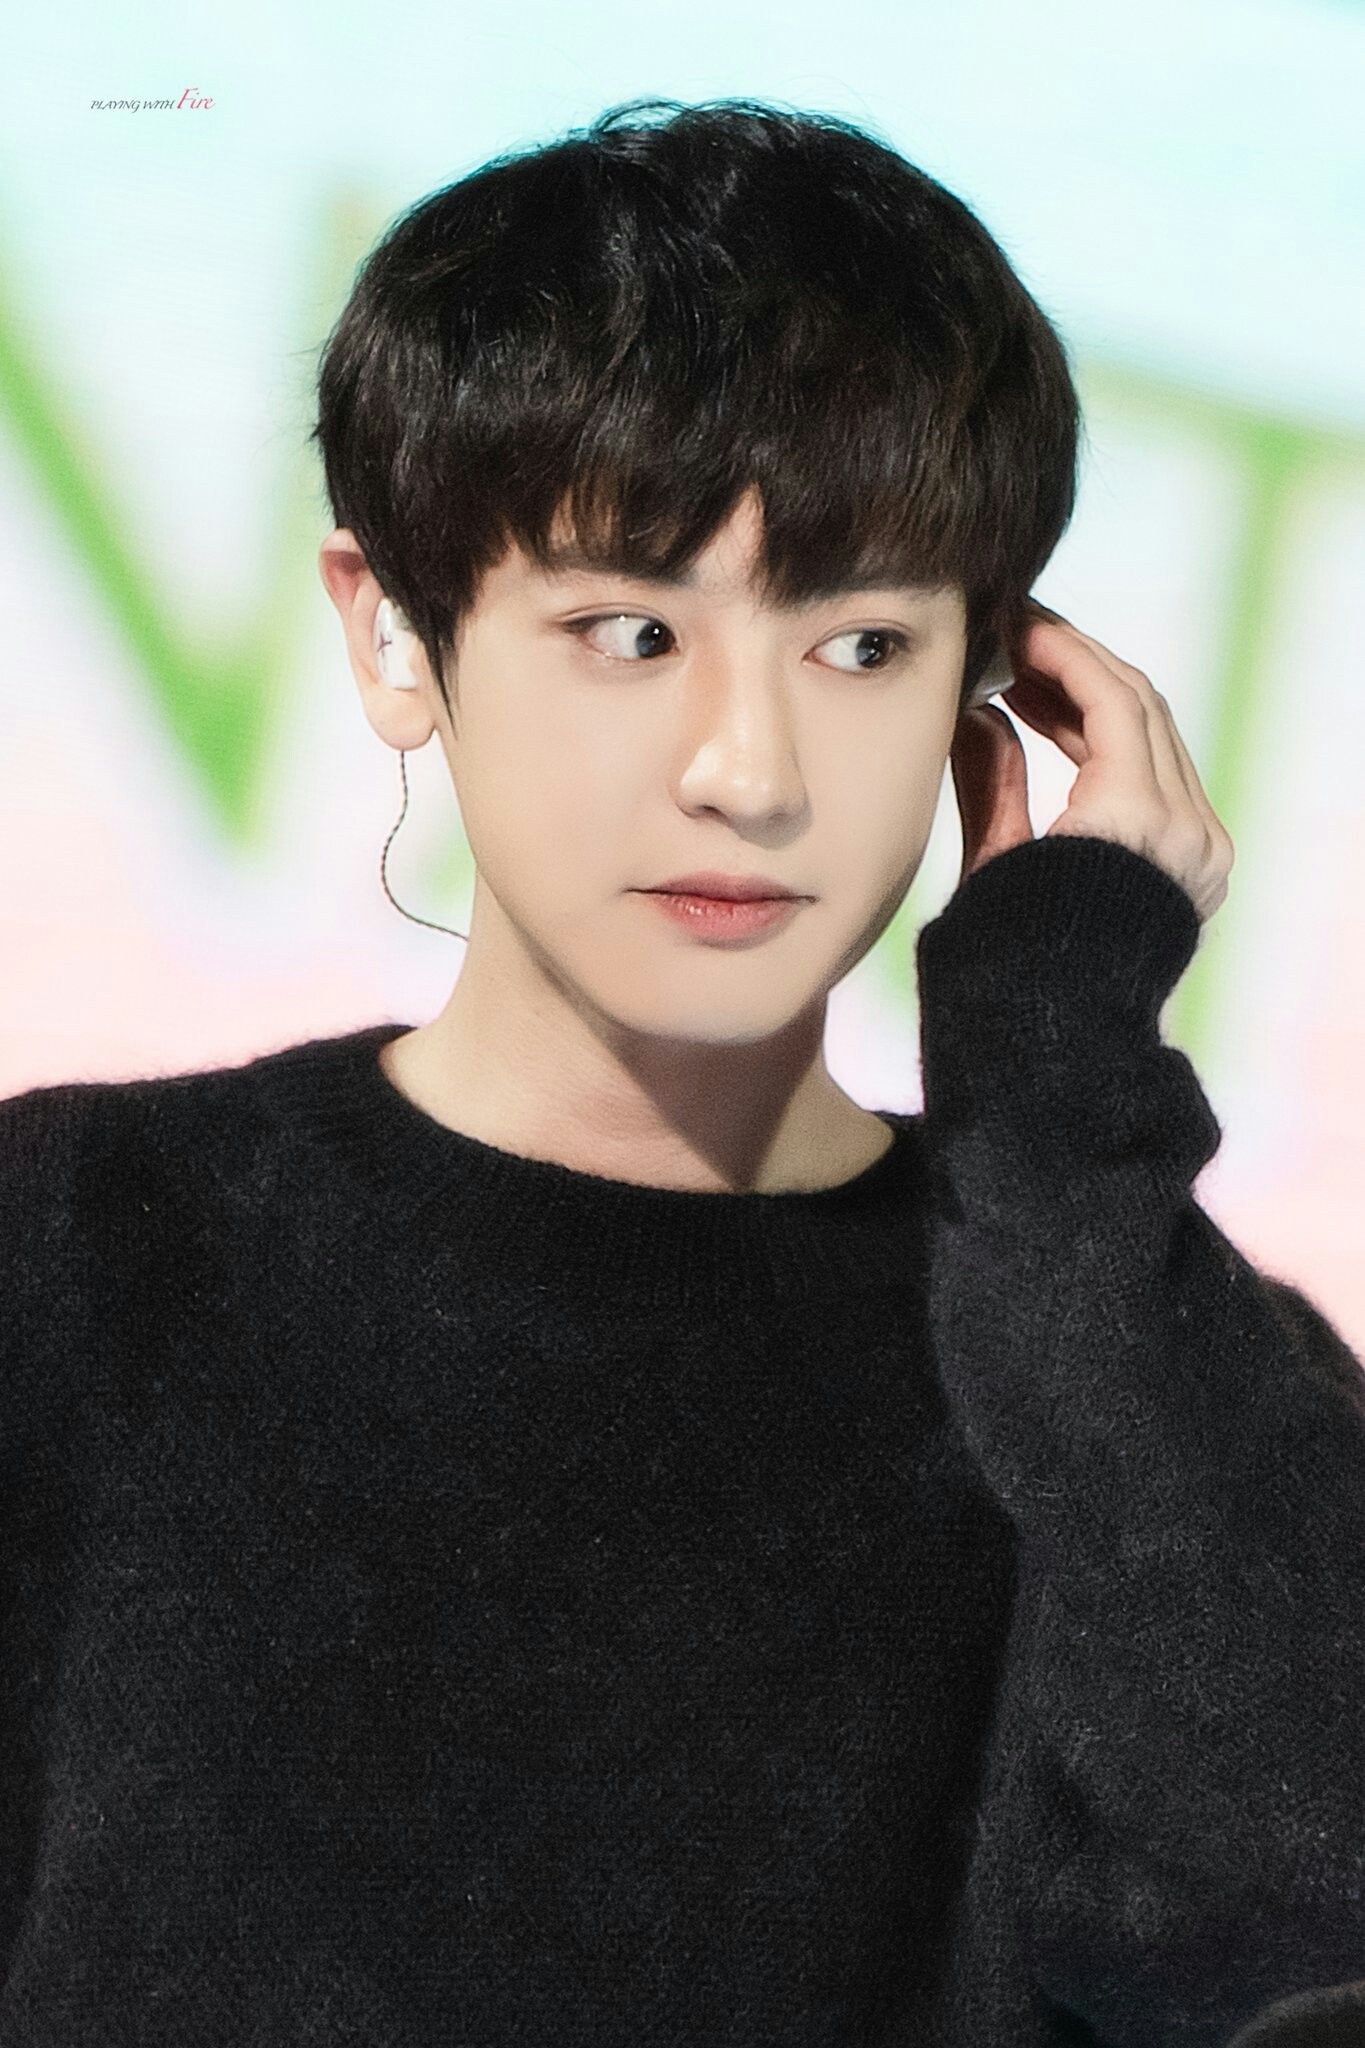 exo-chanyeol-to-release-new-song-minimal-warm-in-collaboration-with-webtoon-shes-my-type-2